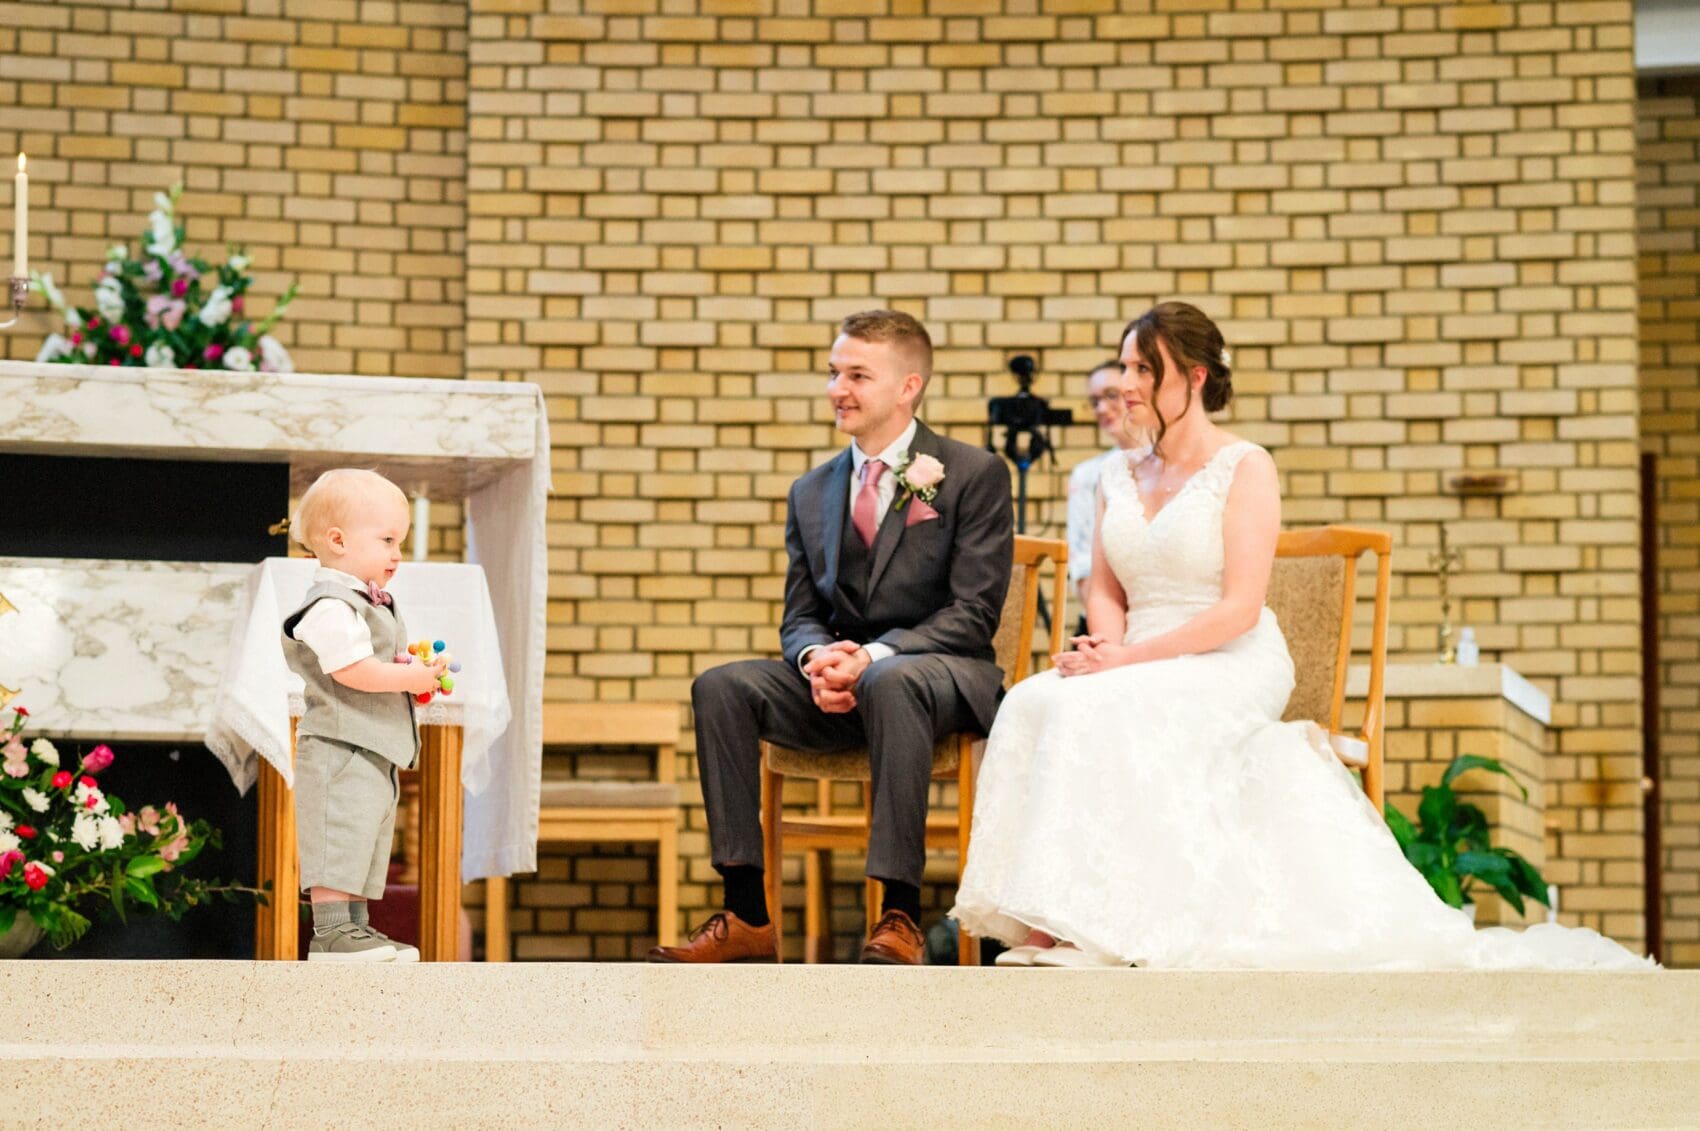 Paige boy steals the show at St Mary's Catholic Church wedding